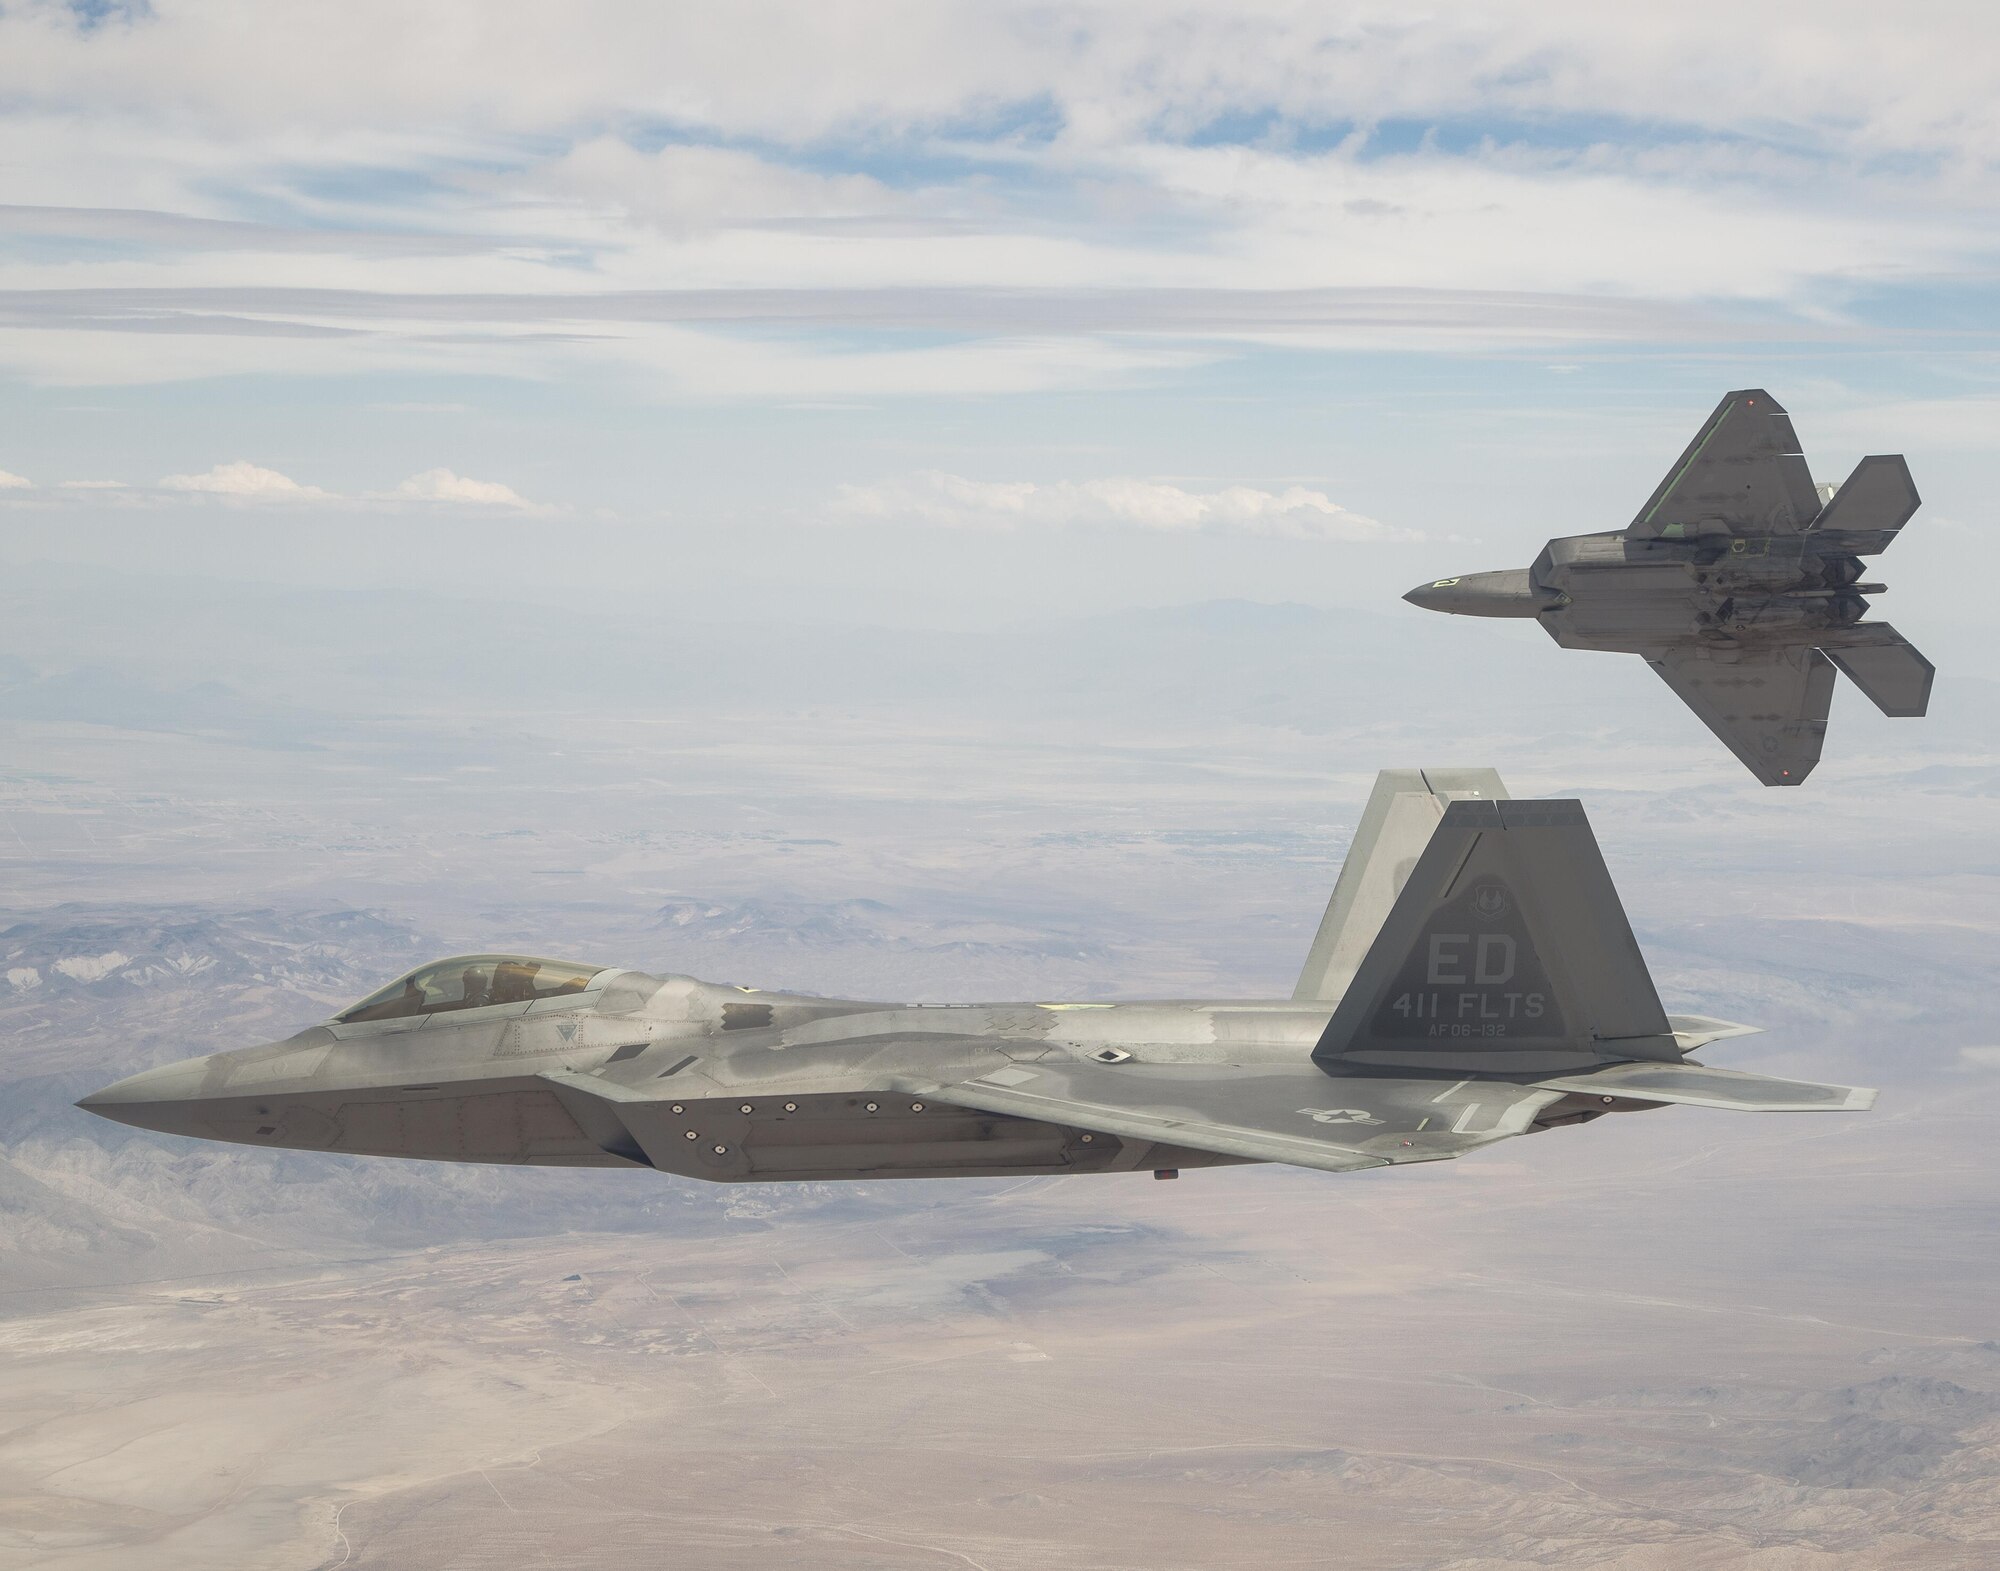 Two F-22 Raptors from the 411th Flight Test Squadron fly above the California High Desert in this photo.  Developmental tests of air-to-air missiles against an aerial target were completed April 18 at the Utah Test and Training Range as part of a major capability upgrade. (Courtesy photo by Chad Bellay/Lockheed Martin)